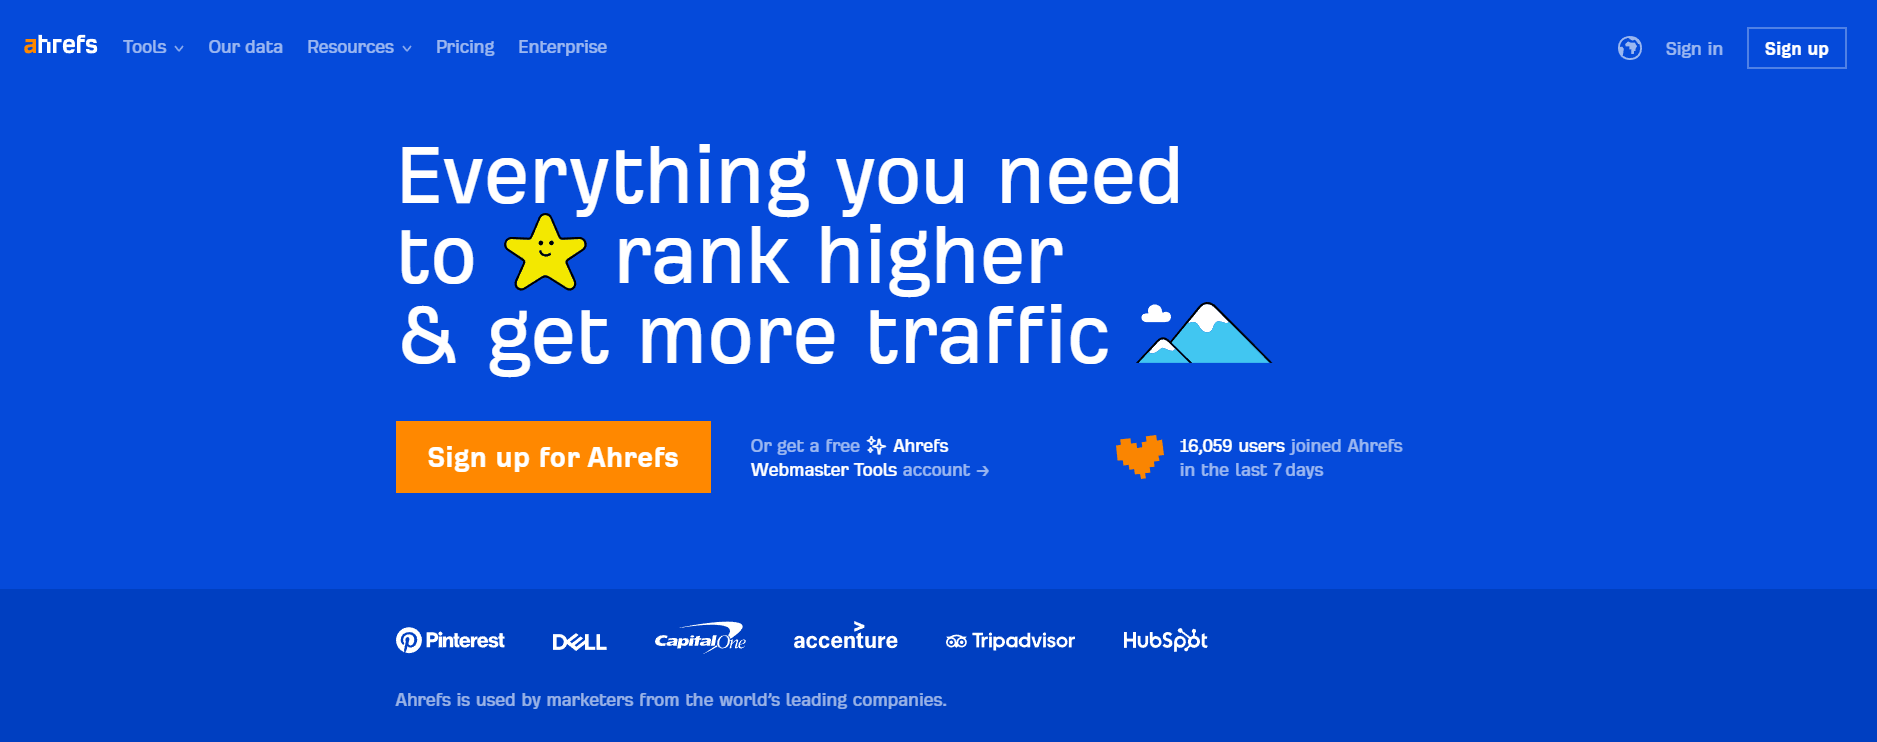 Ahrefs - The best SEO tool for competitor research